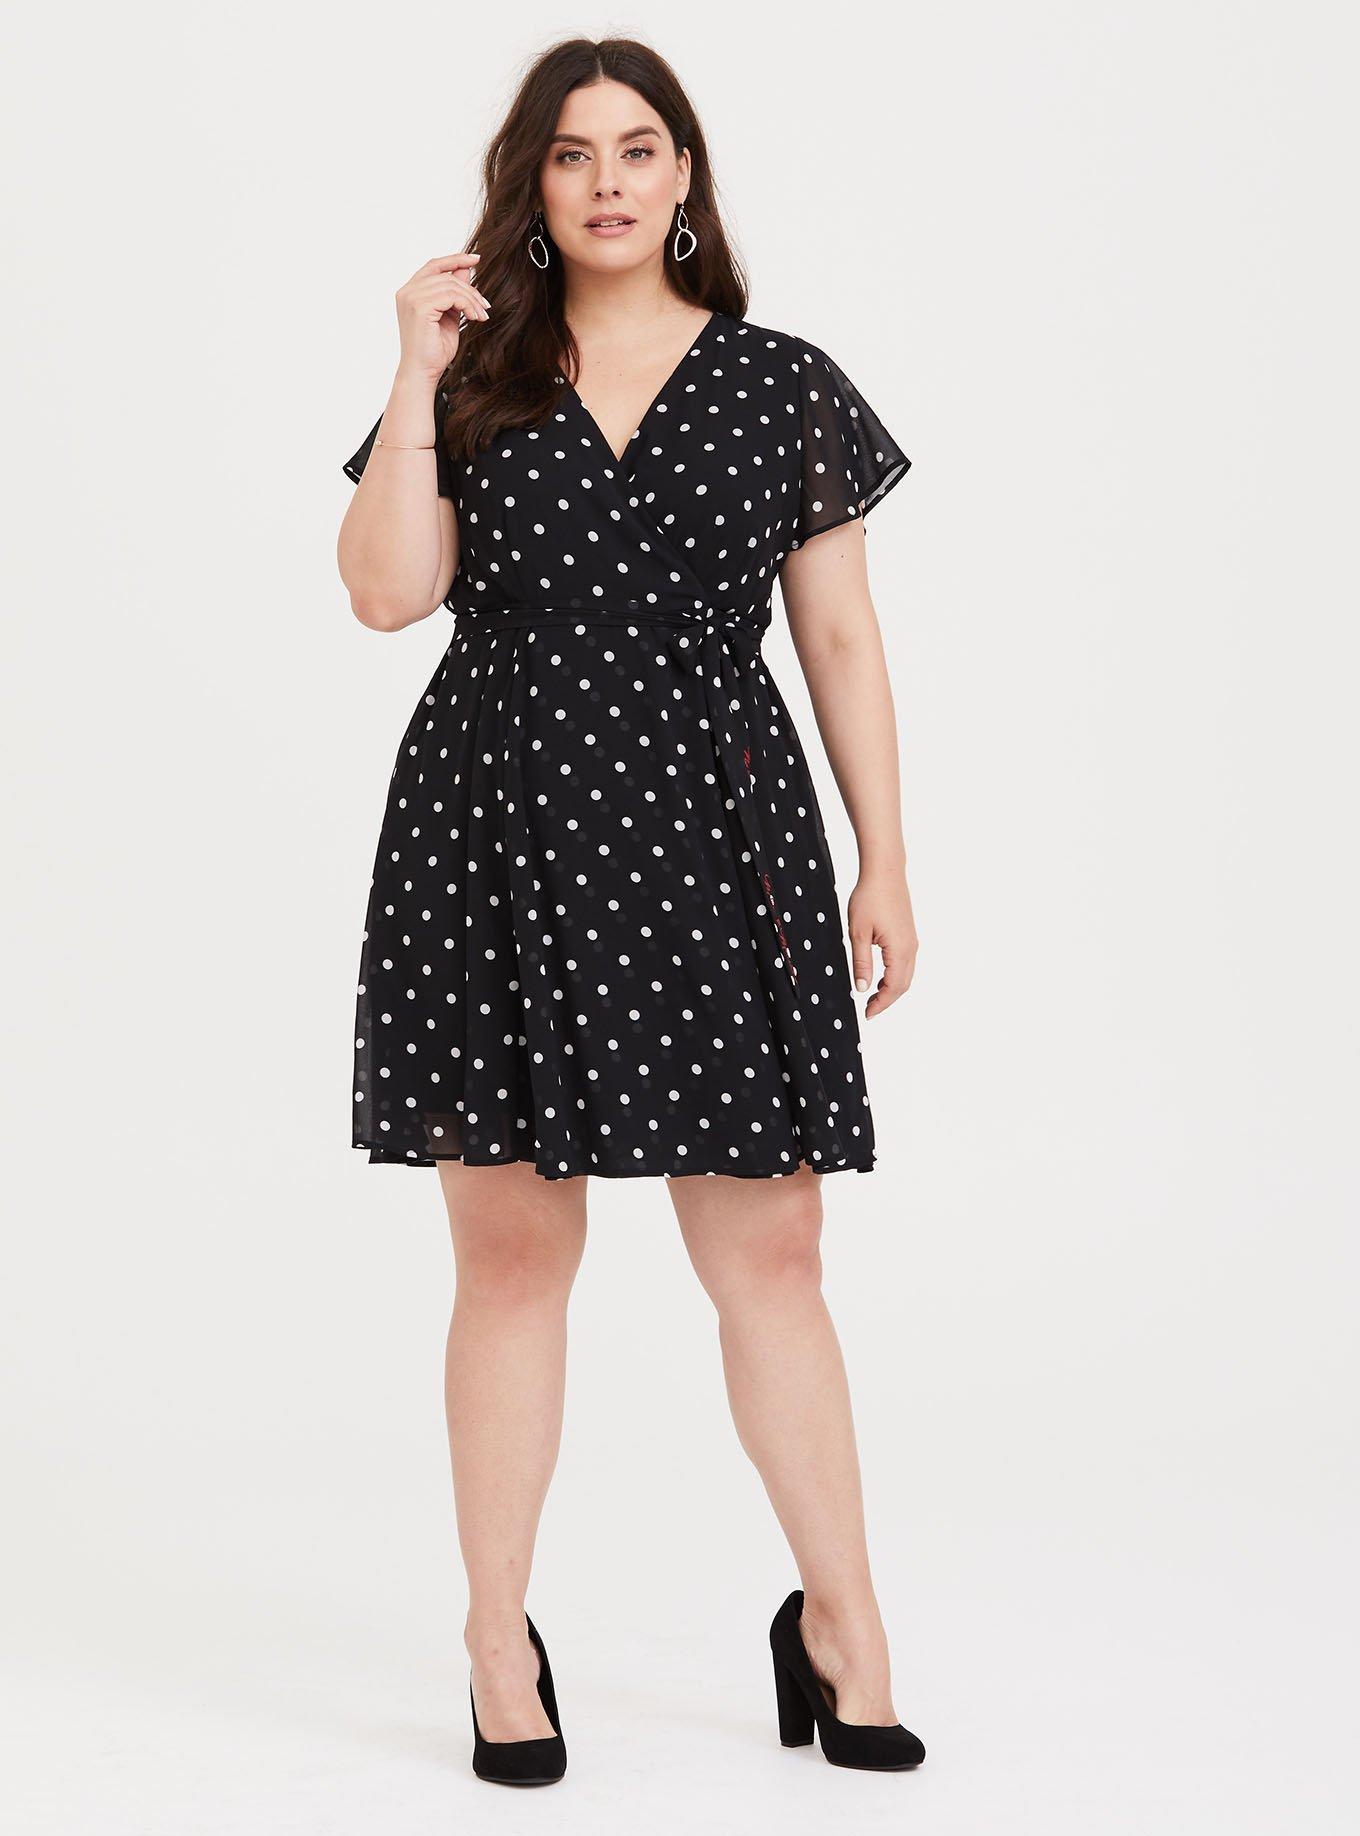 minnie mouse black and white dress